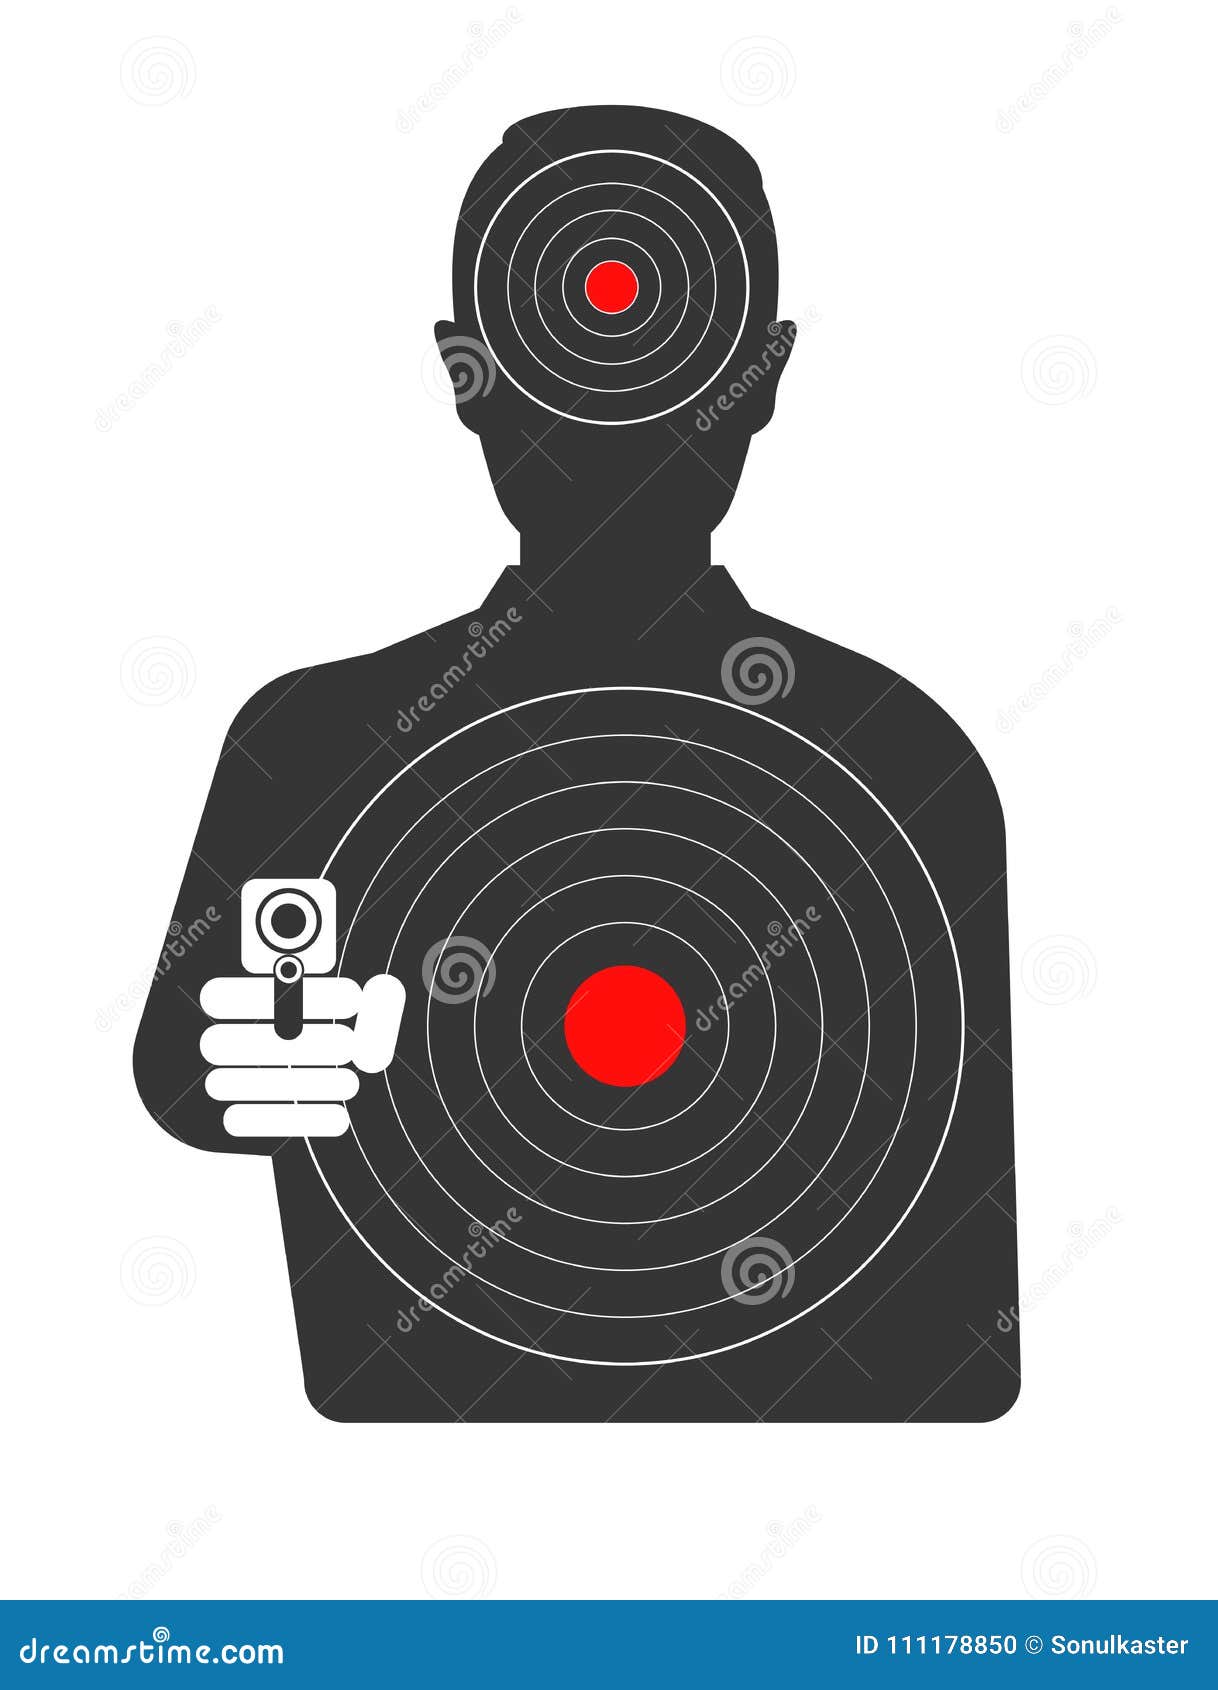 Targets With Black Silhouettes Of Animals On A White Background ...